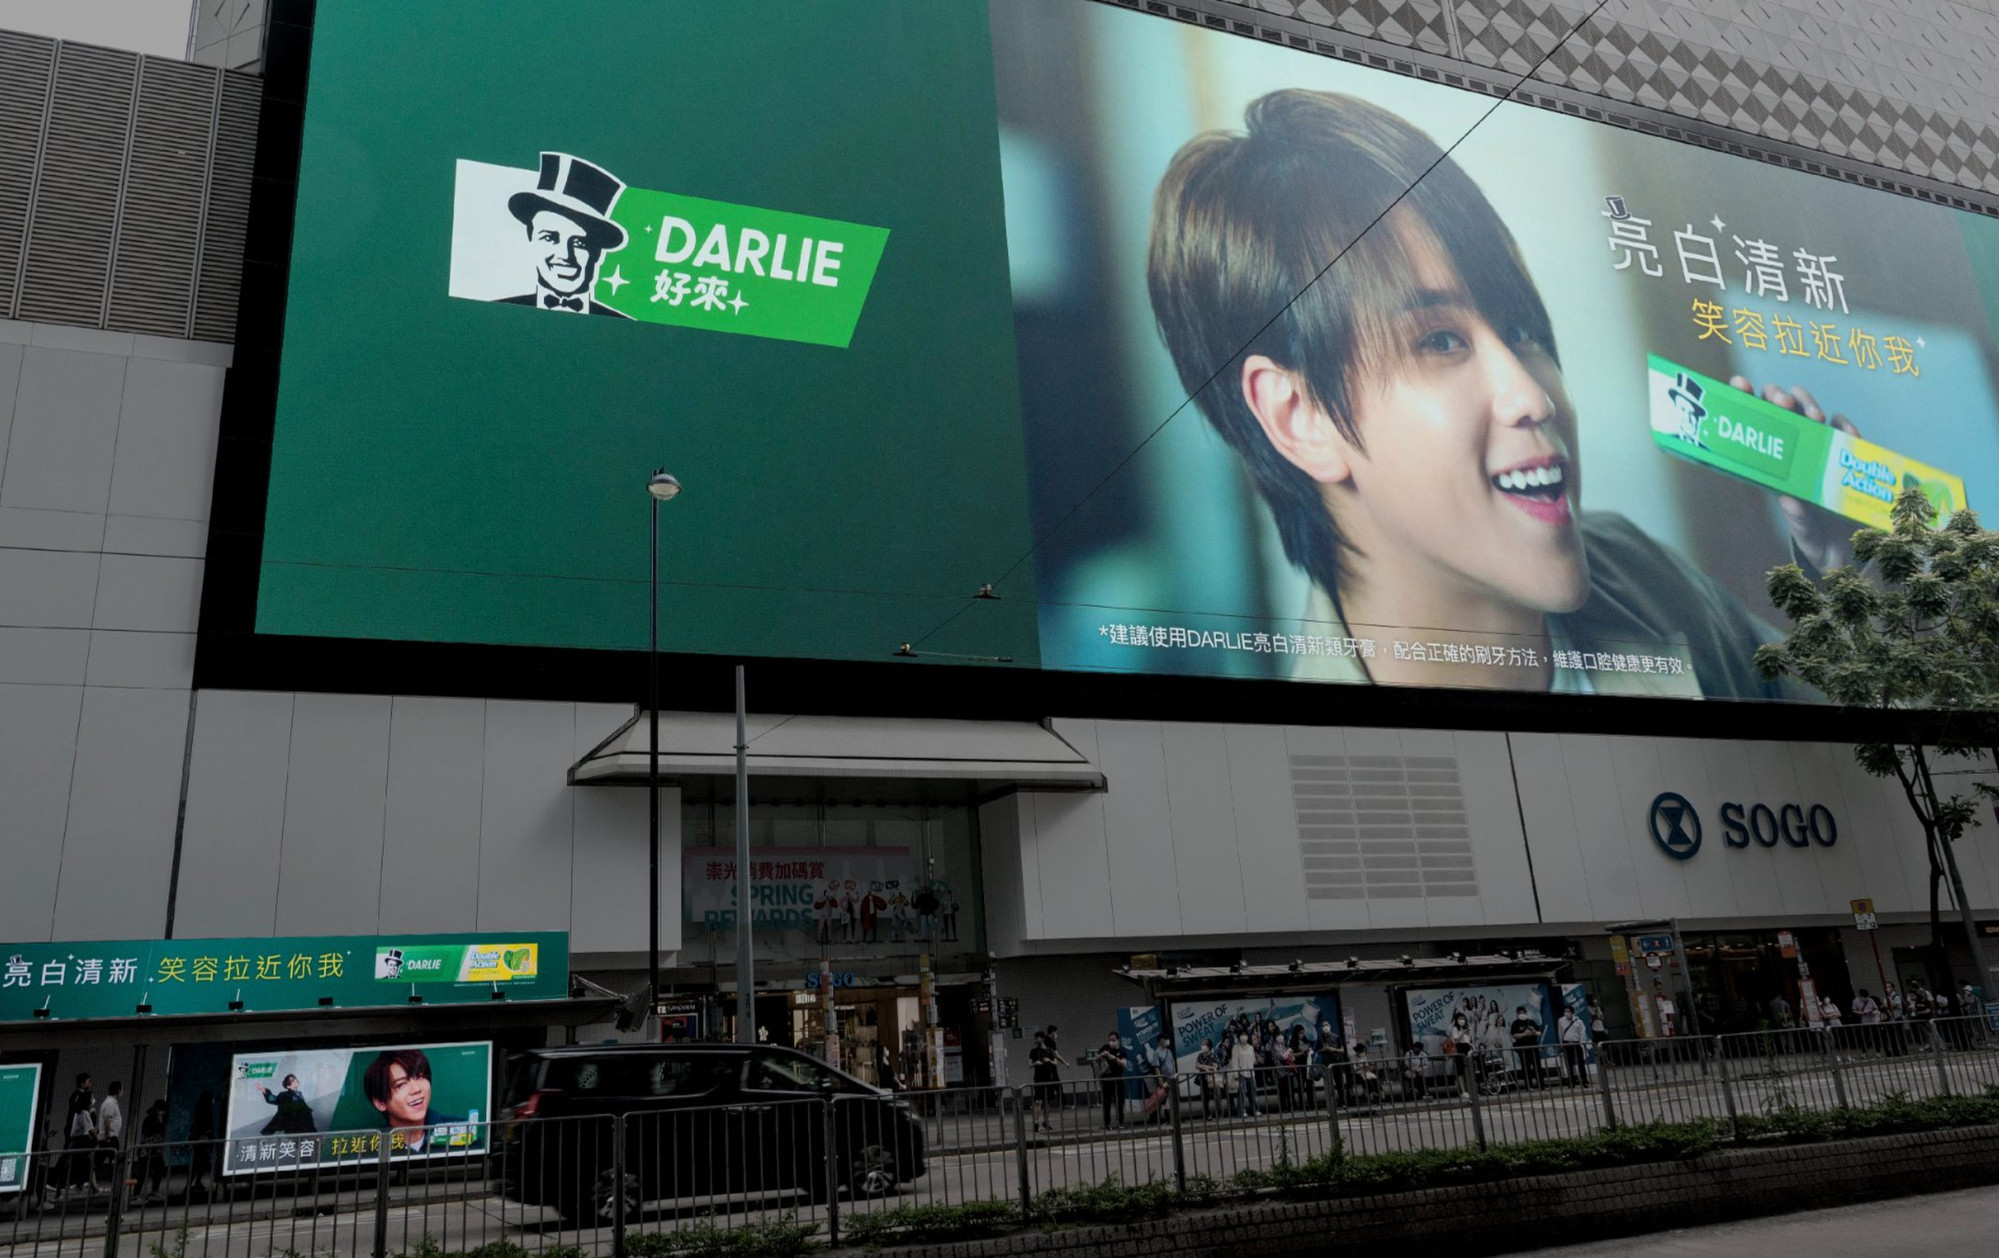 Brands in Hong Kong are quick to cash in on the star power of some celebrities, but critics say the pie is limited and Mirror’s best days are over. Photo: Facebook/Darlie Hong Kong